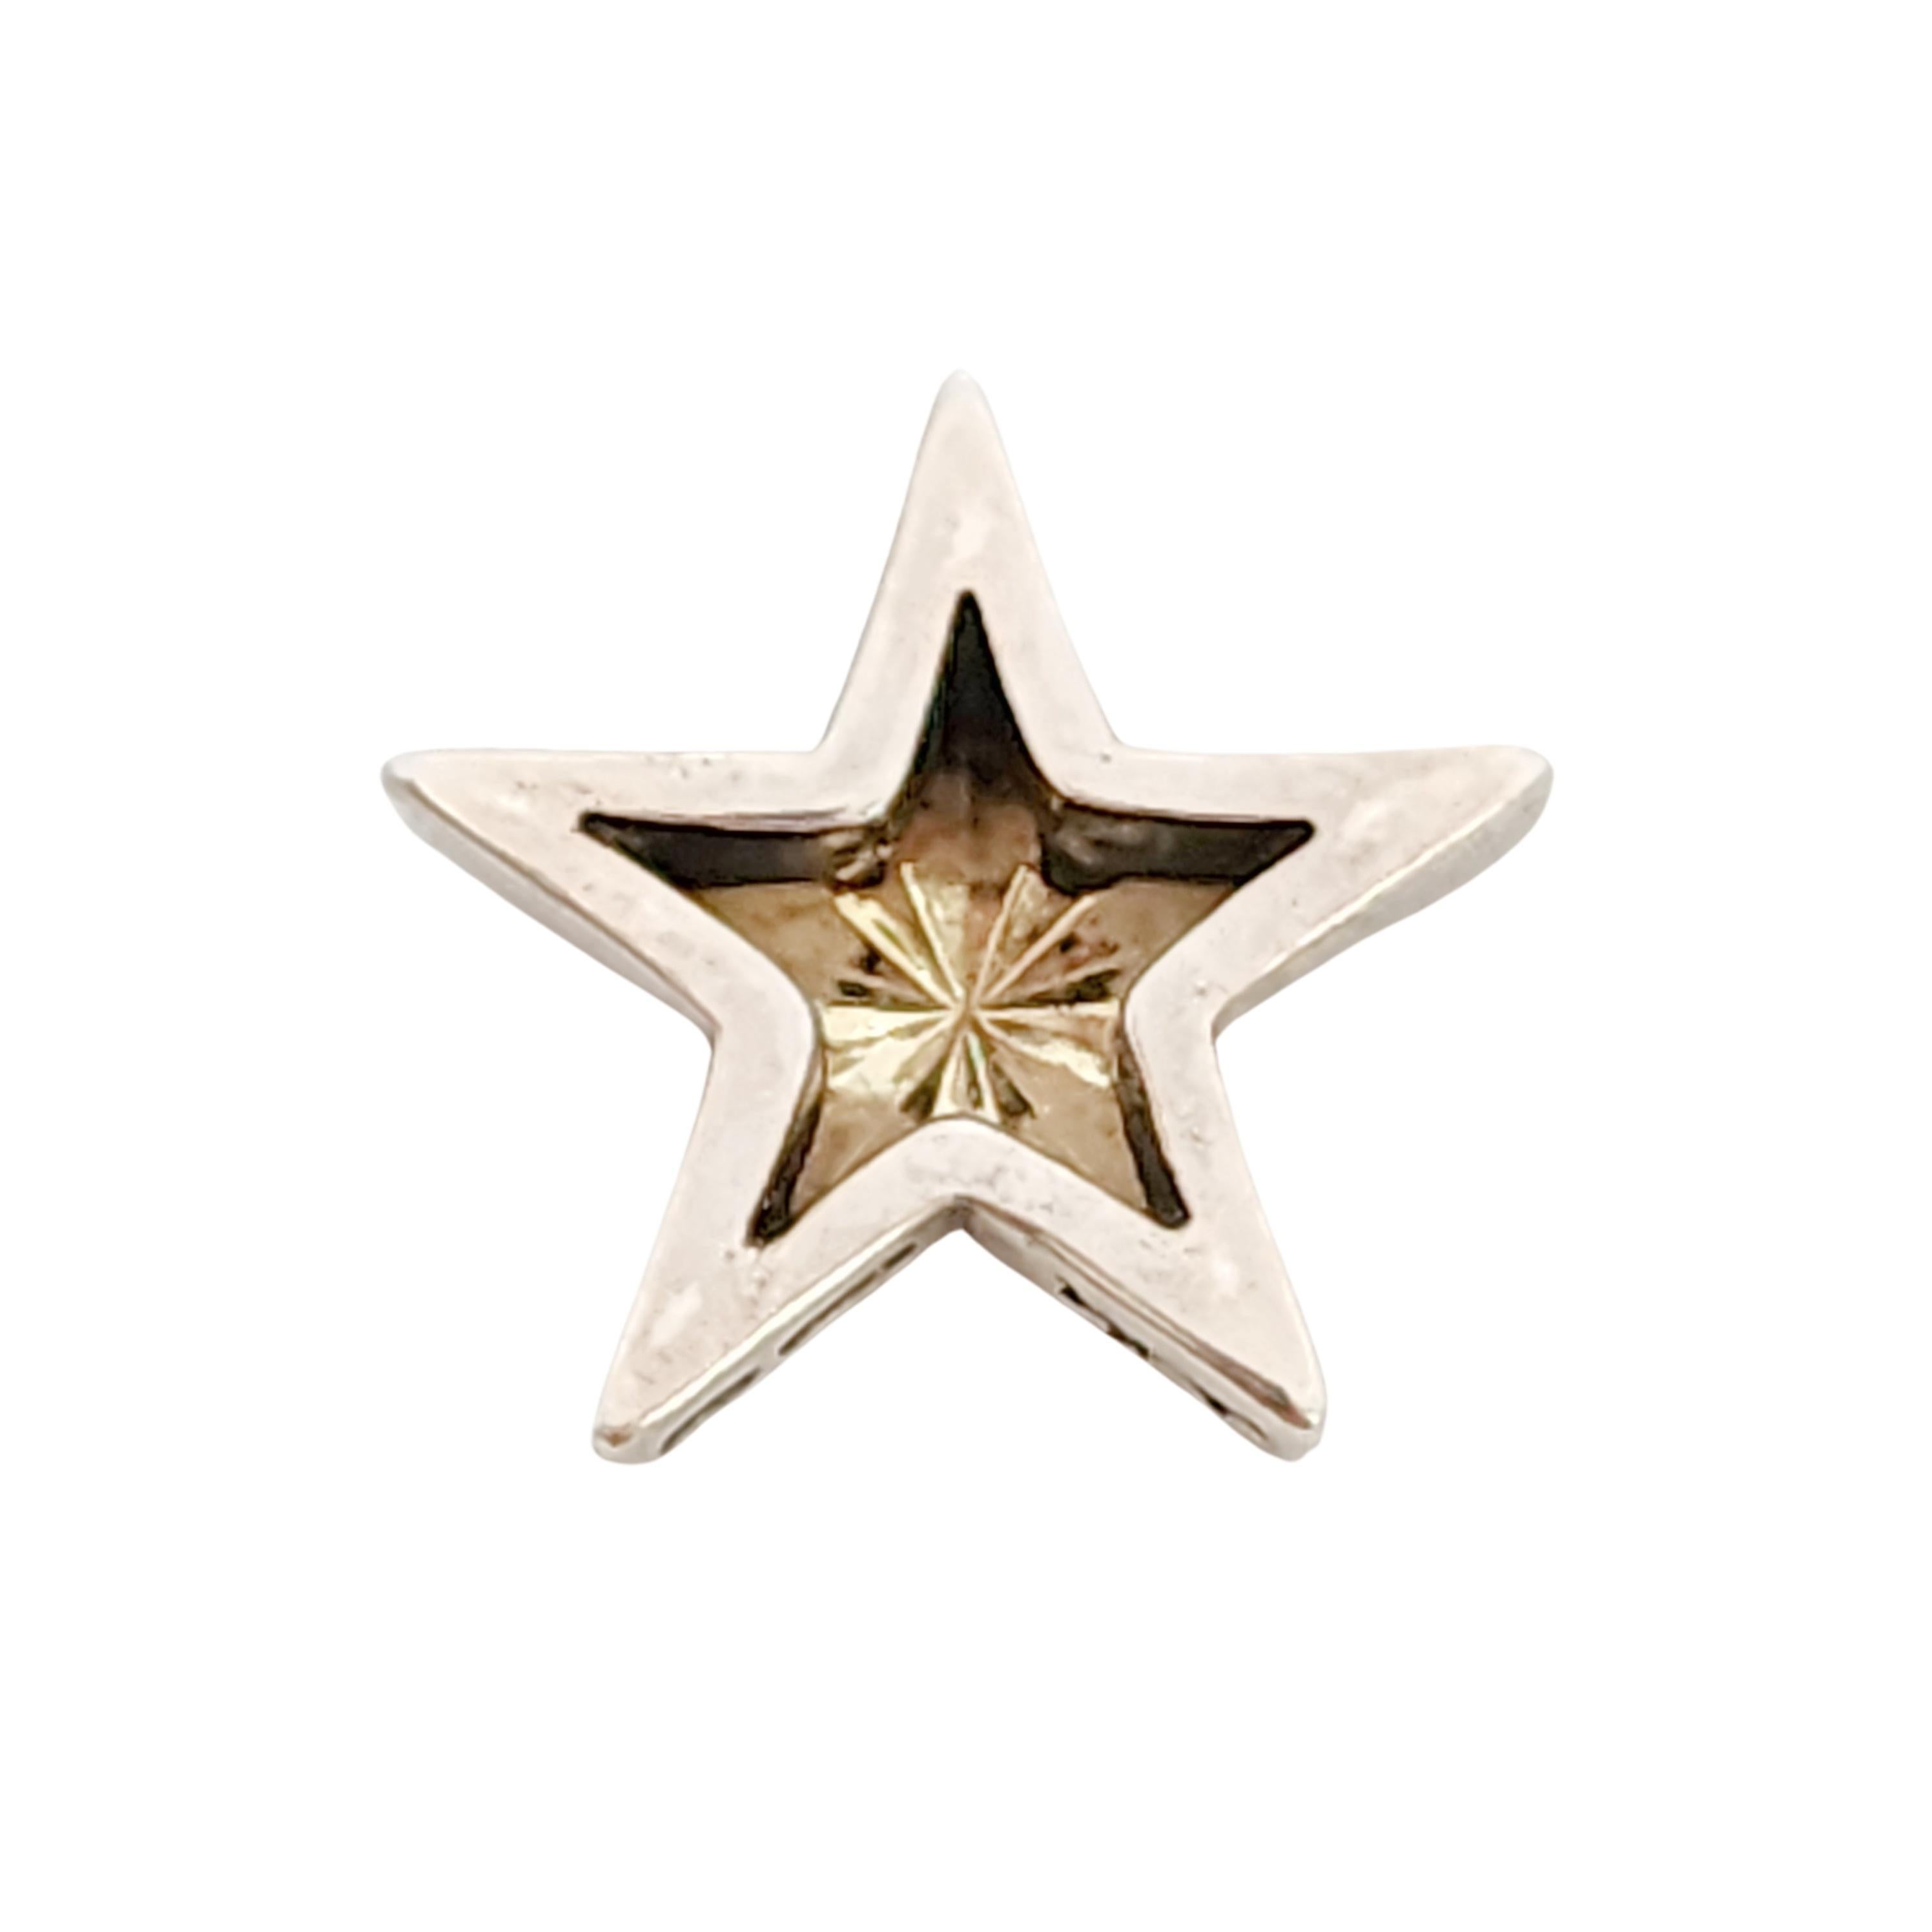 Sterling silver 18K yellow gold star pendant by Ann King.

Beautiful gold star center with a silver frame slider style pendant.

Measures approx 7/8